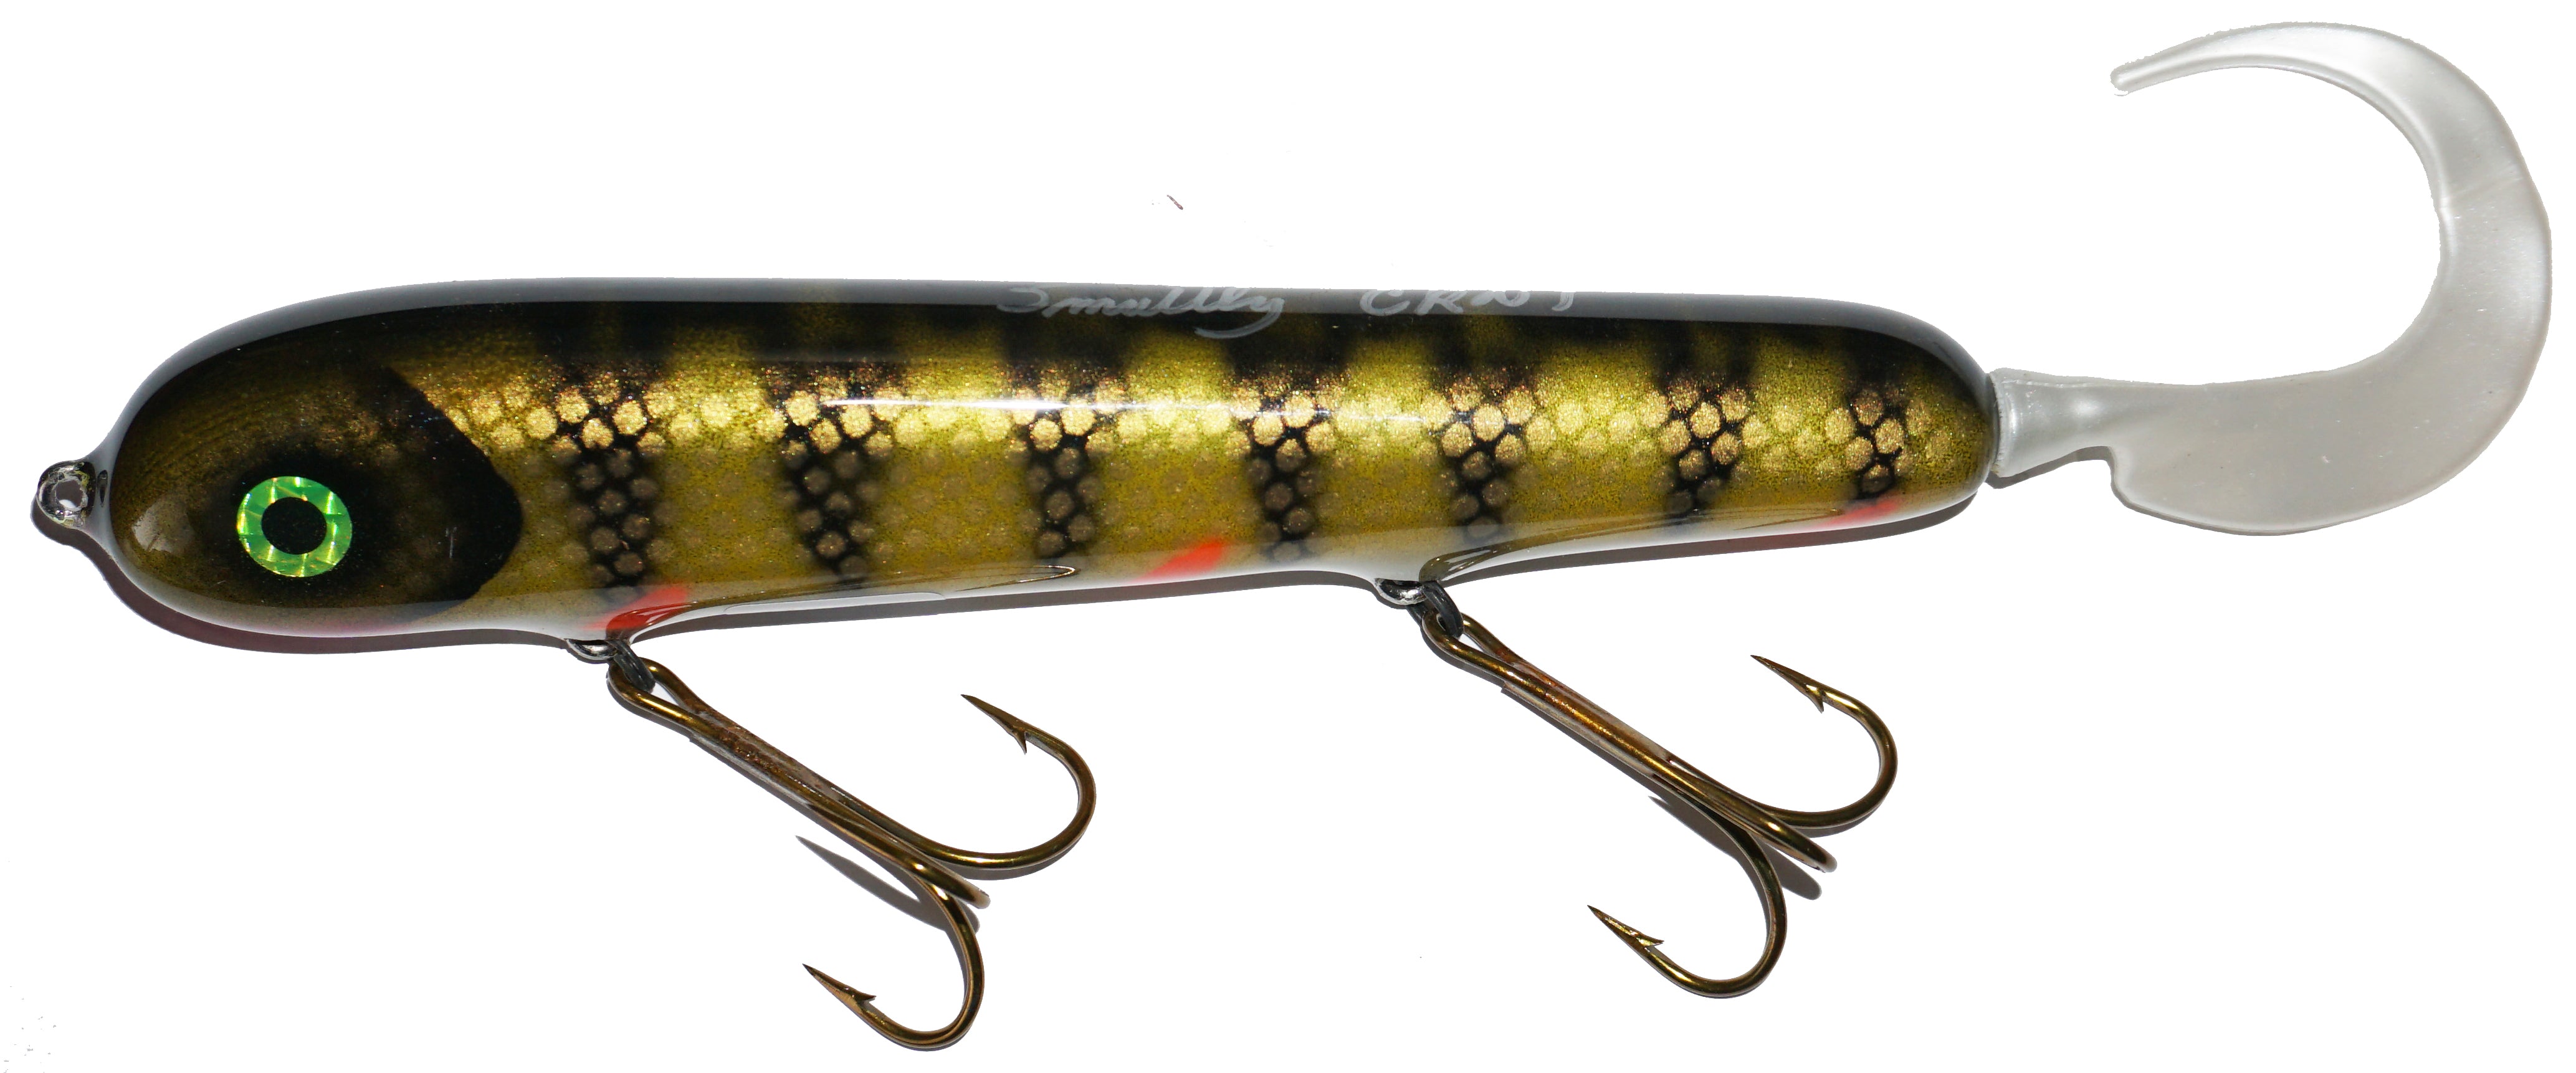 H&H 8 Classic Round Nose Glide Bait, with Stinger Tail, Barred Musky  Gold-Smaller Profile similar to Cobbs Slim Round Nose and HR HugheysNice  2'-3' Glide, easy to use one pump on the